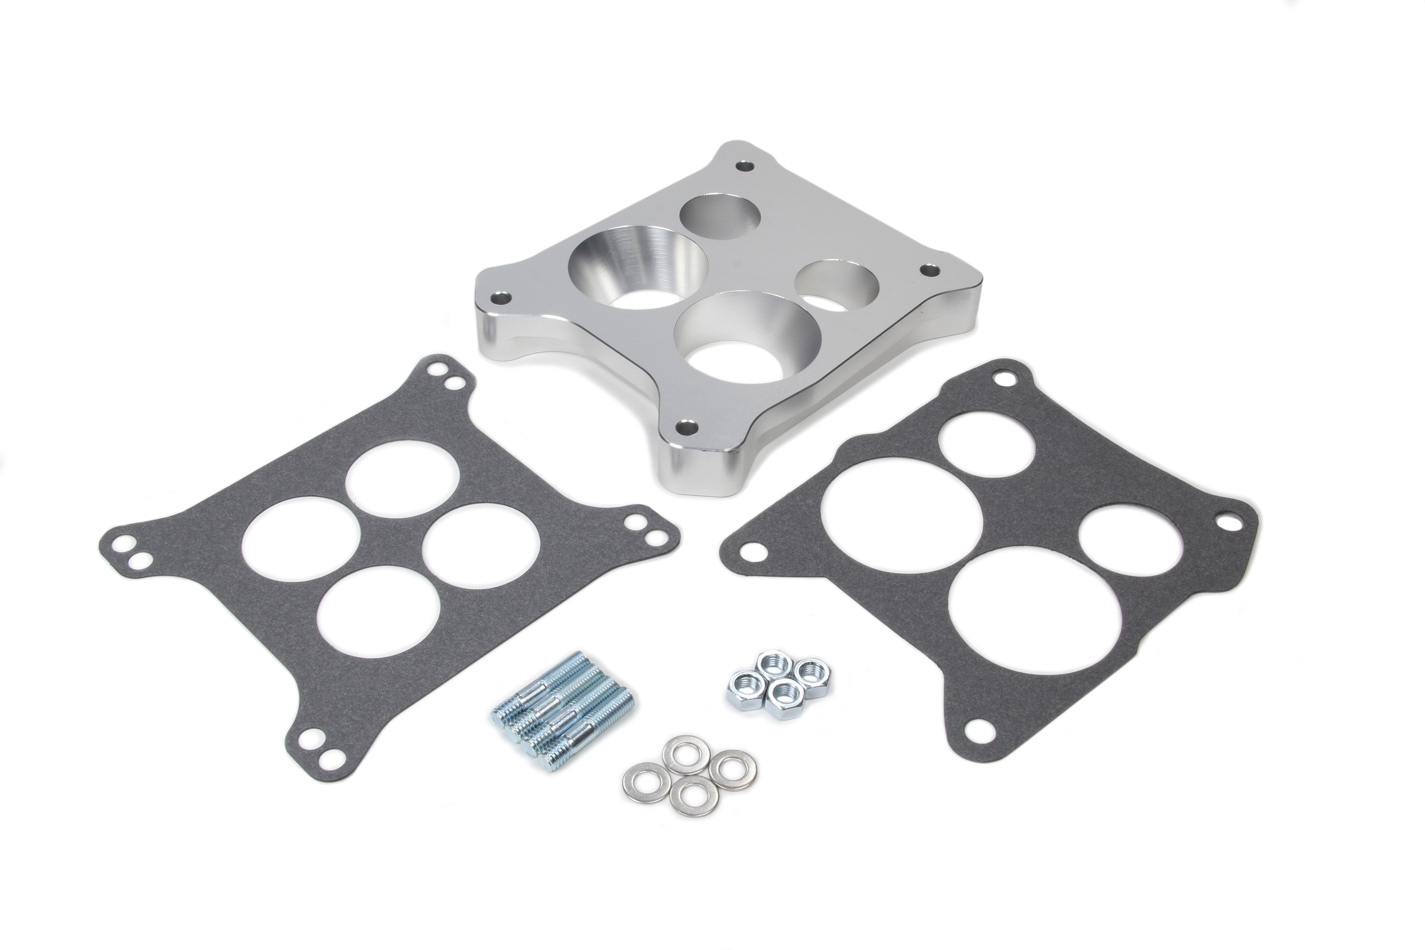 Trans Dapt 3224 Carburetor Adapter, 1 in Thick, 4 Hole, Square Bore to Spread Bore, Aluminum, Clear Anodized, Each